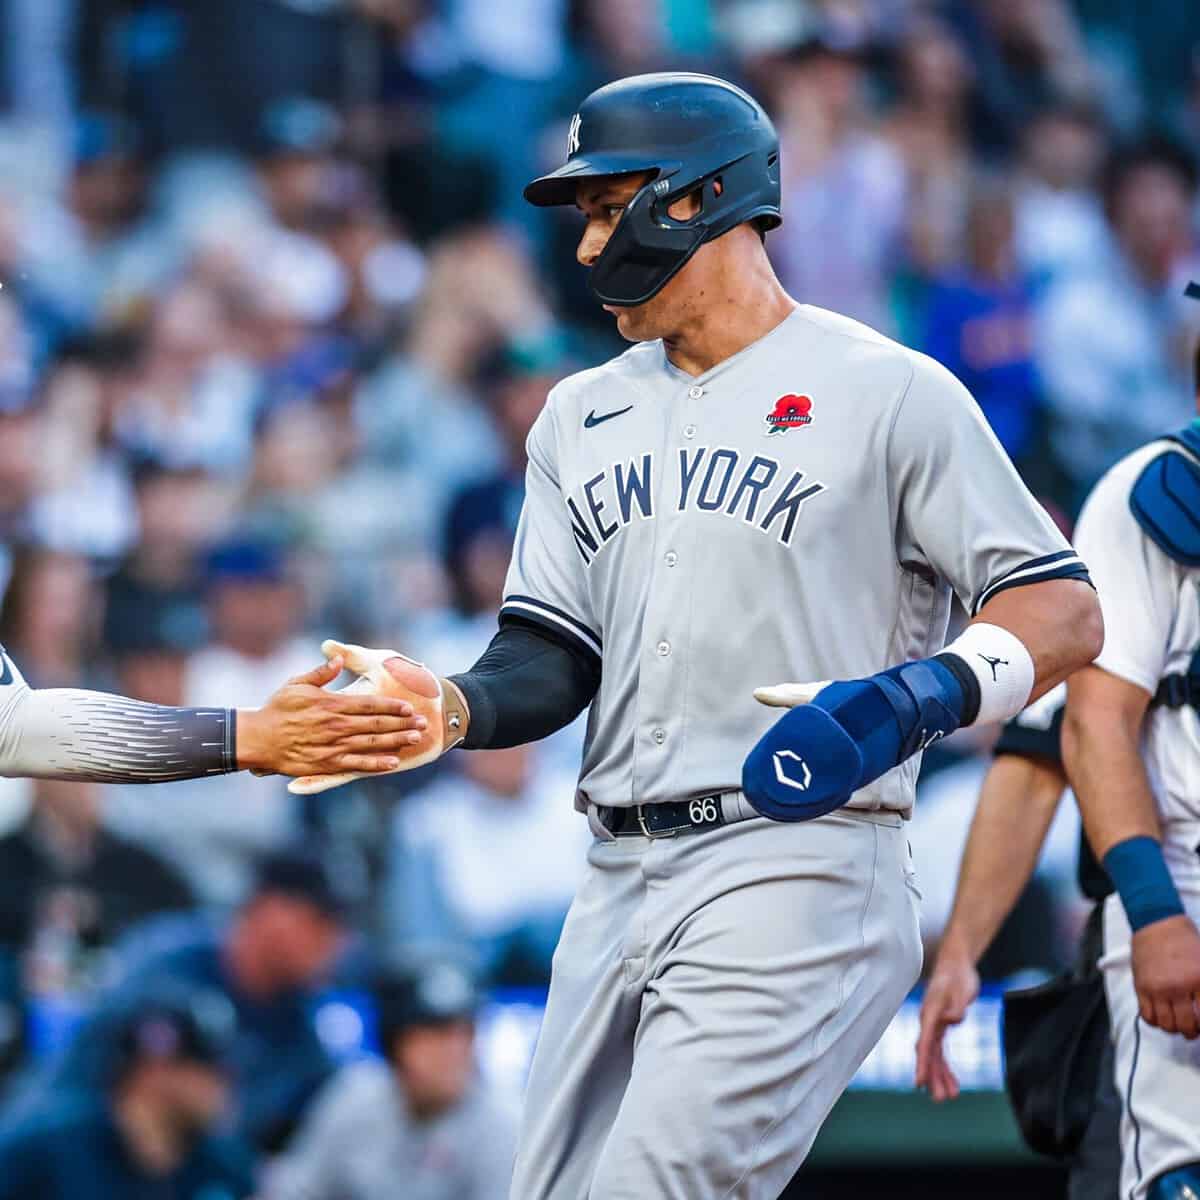 Germán Returns Strong, Judge's HRs Lead Yankees To 10-4 Victory